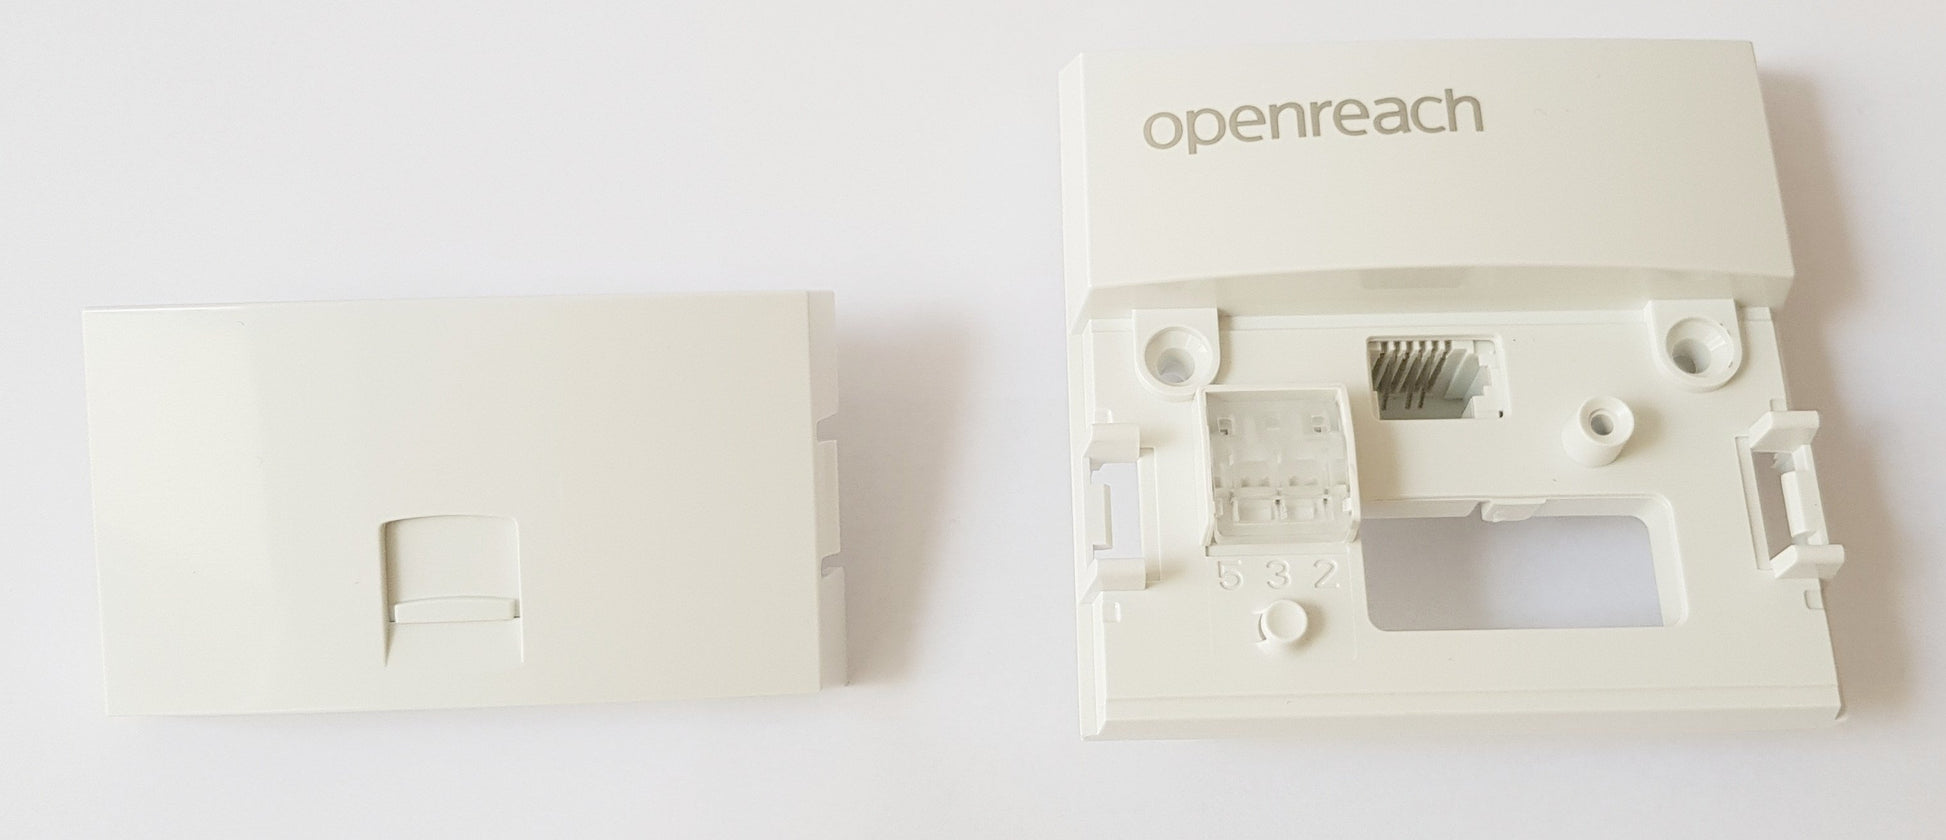 Openreach NTE5C MK2 Mark 2 Faceplate Front opened out